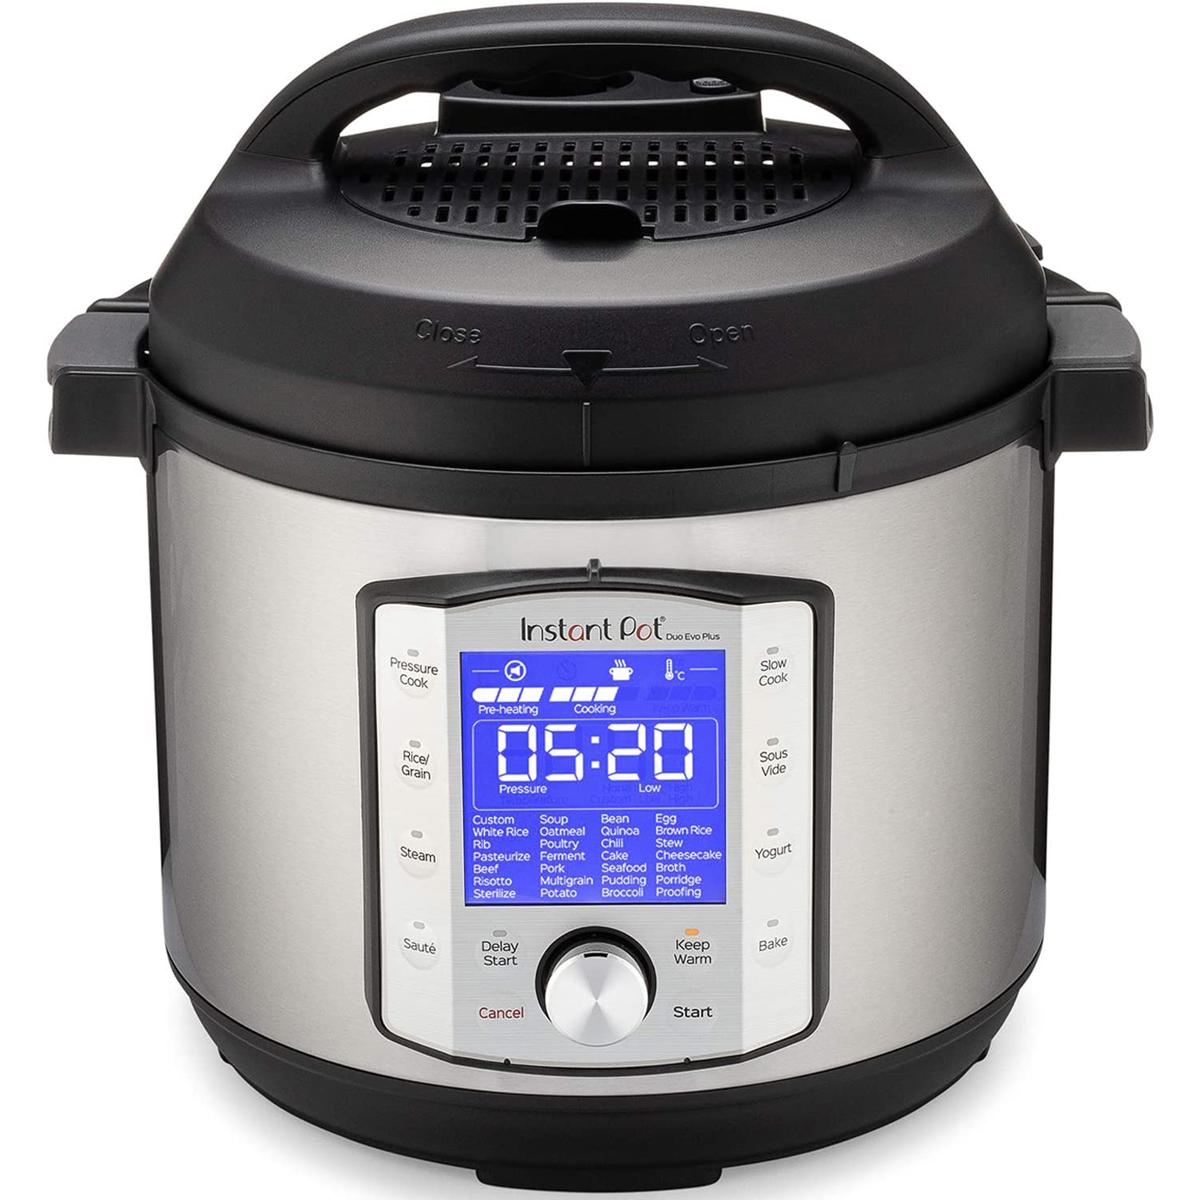 Instant Pot Duo Evo Plus 9 in 1 Pressure Cooker for $69.99 Shipped